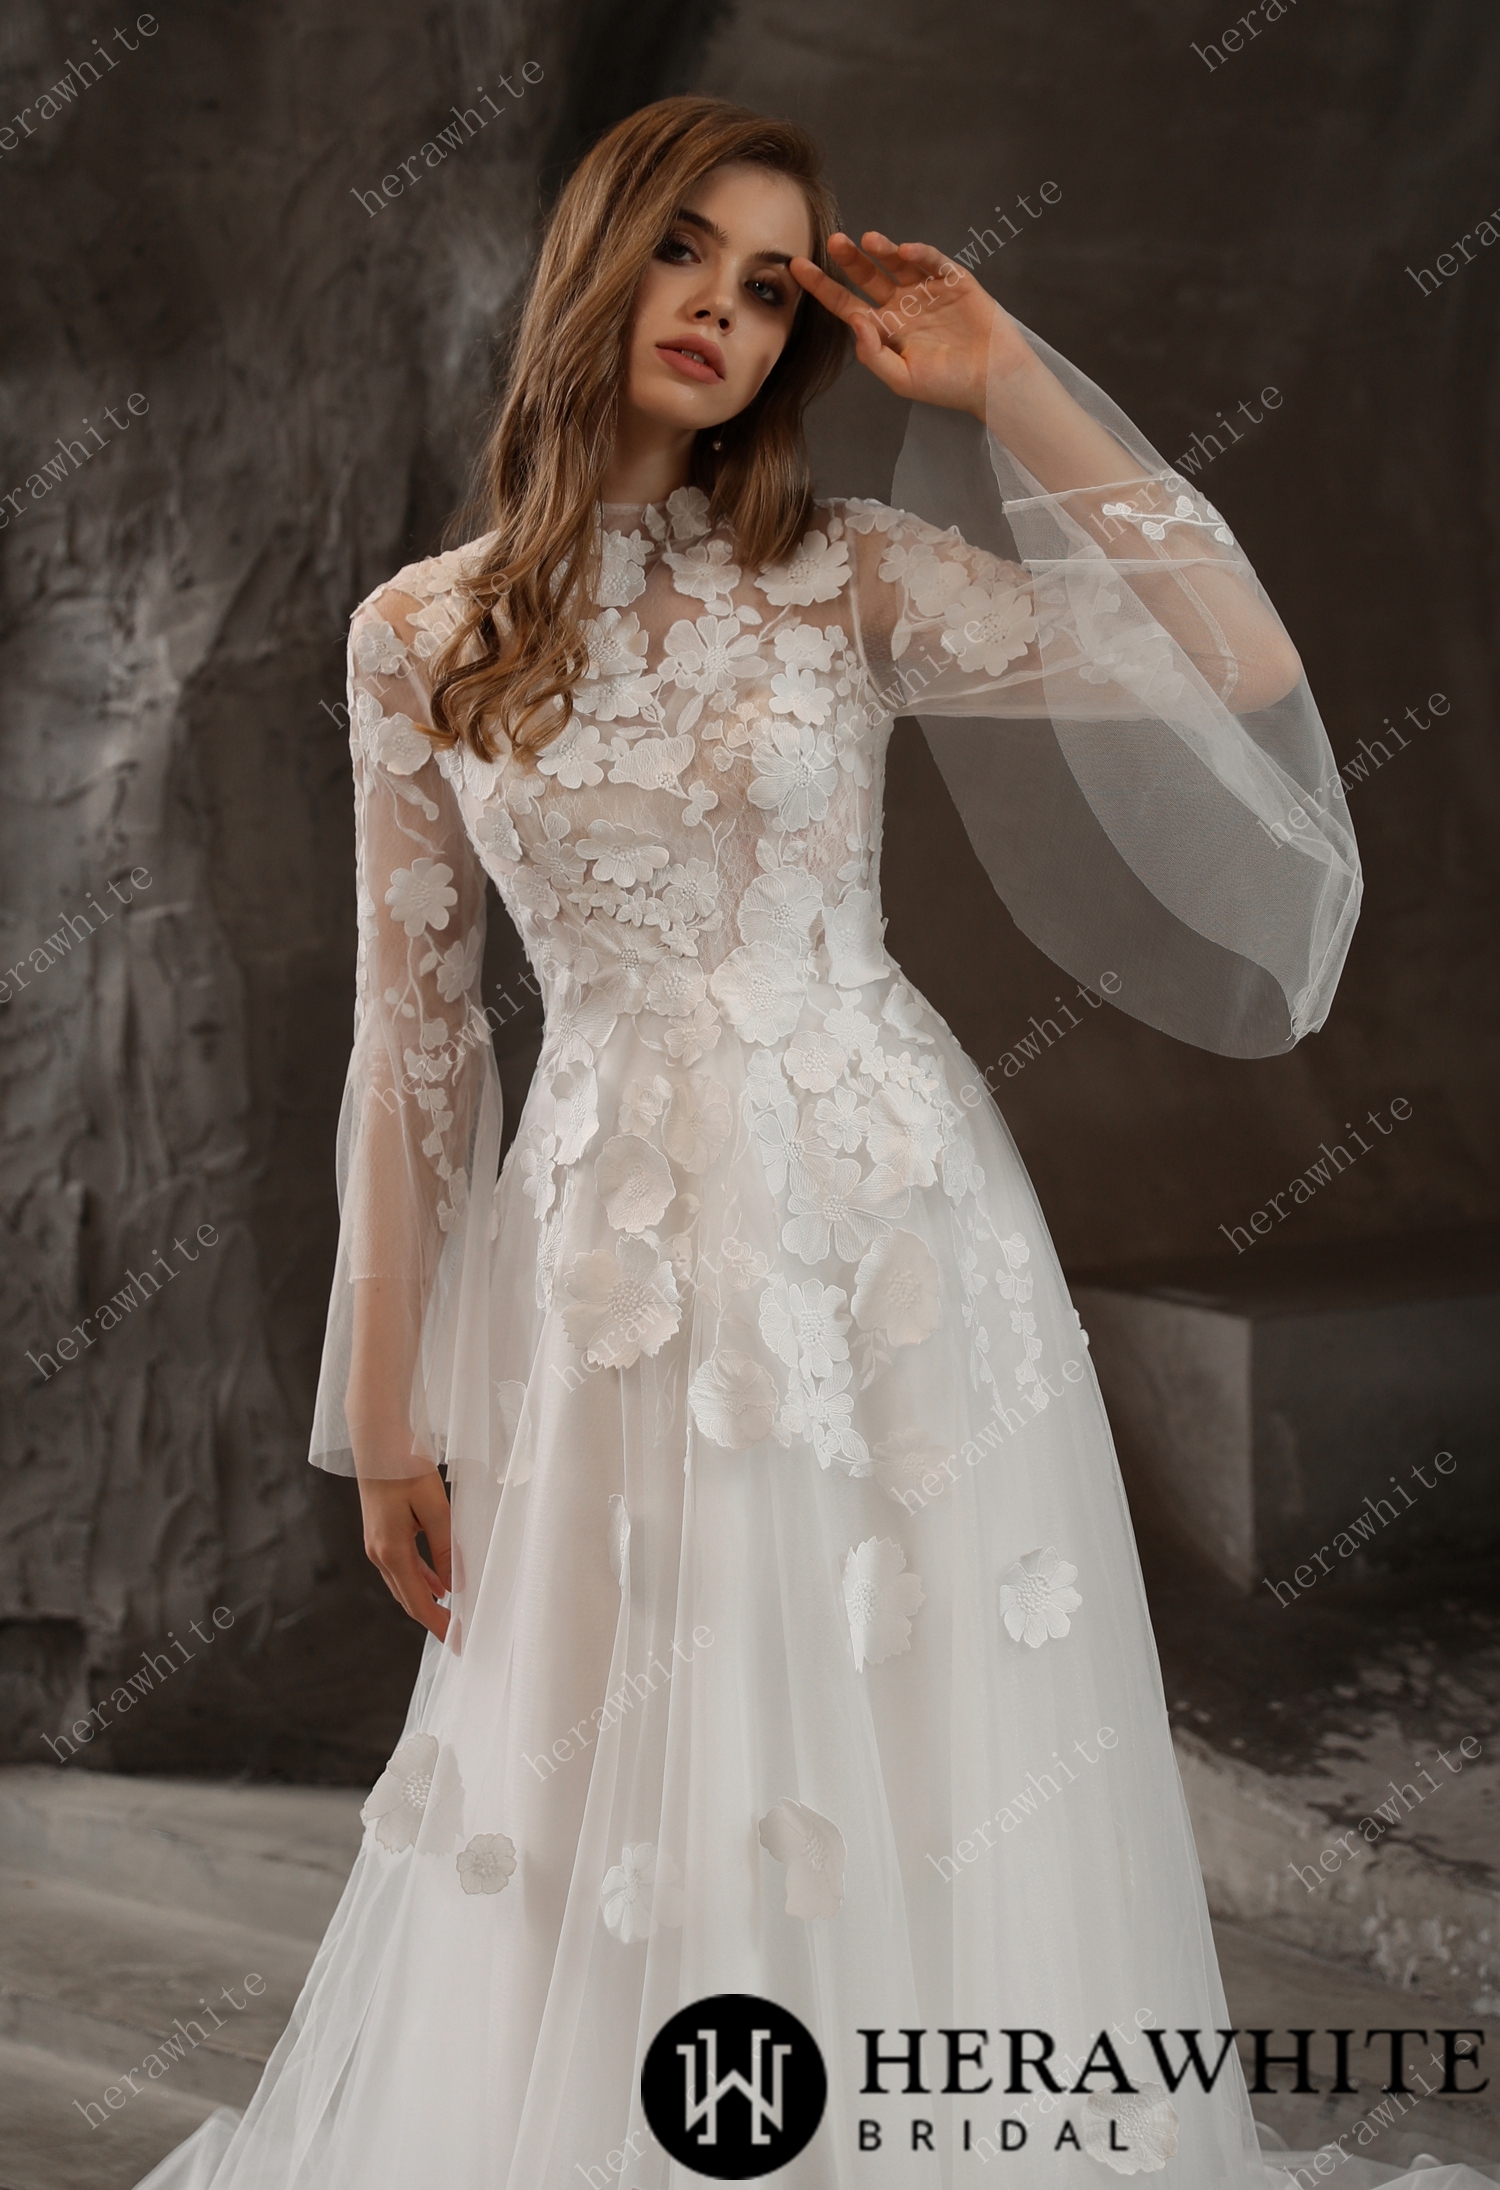 Illusion Long Sleeve High-neck White Lace Wedding Gown - VQ